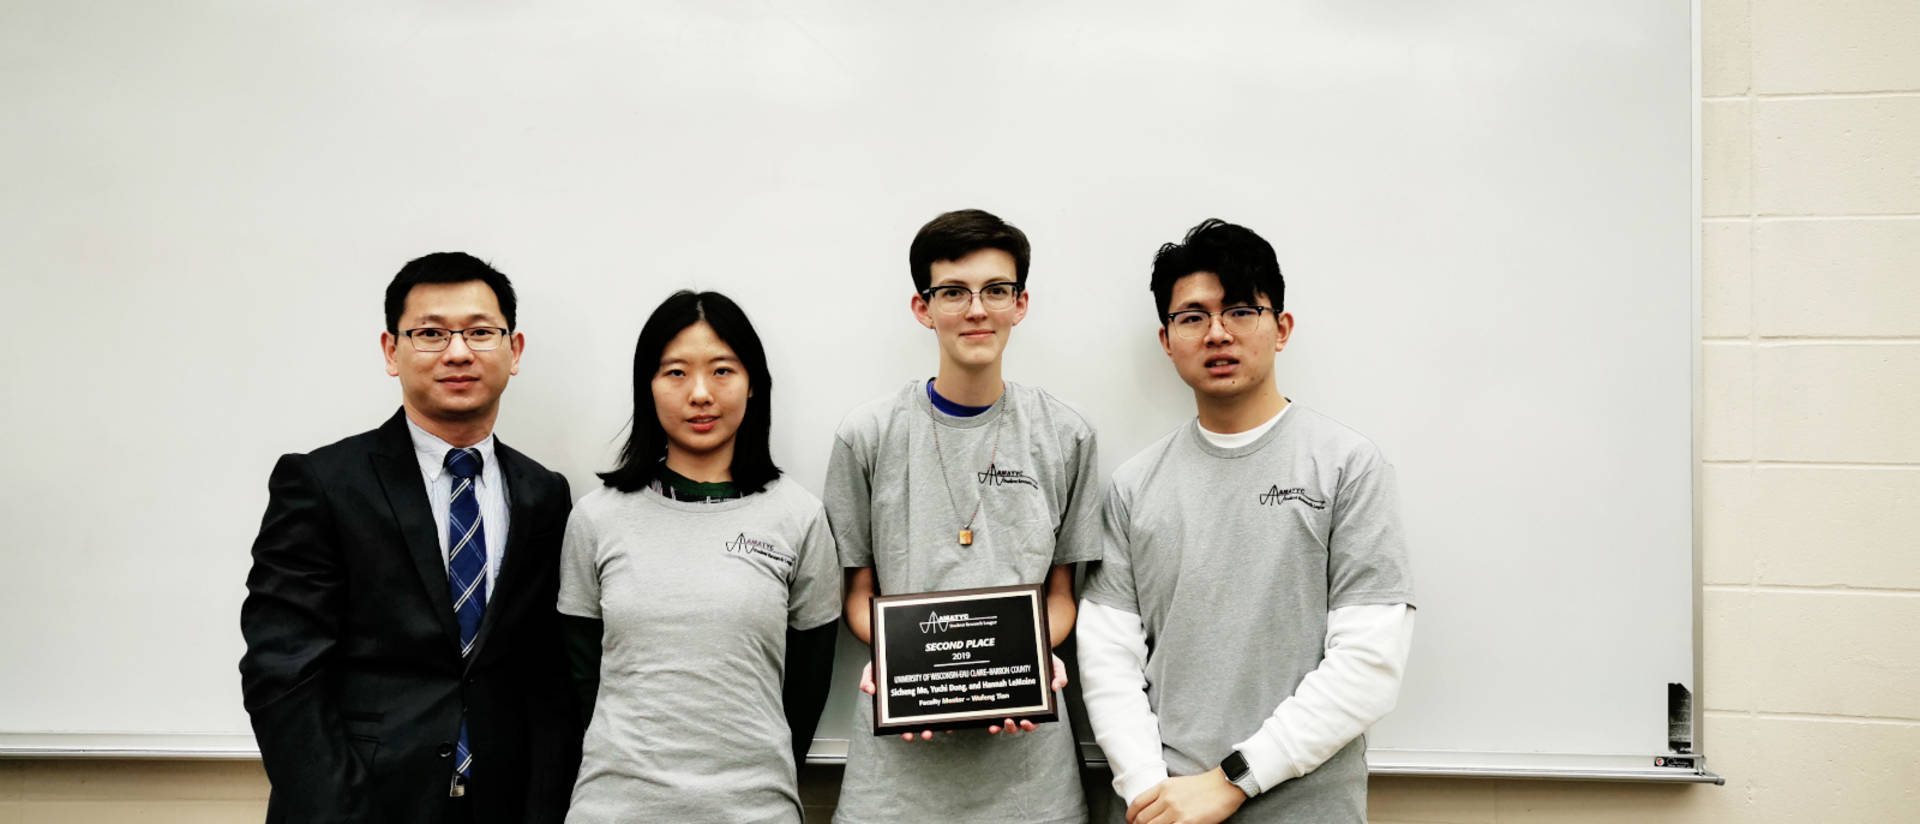 Smart Cities- Smart Futures competition team from UW-Eau Claire–Barron County